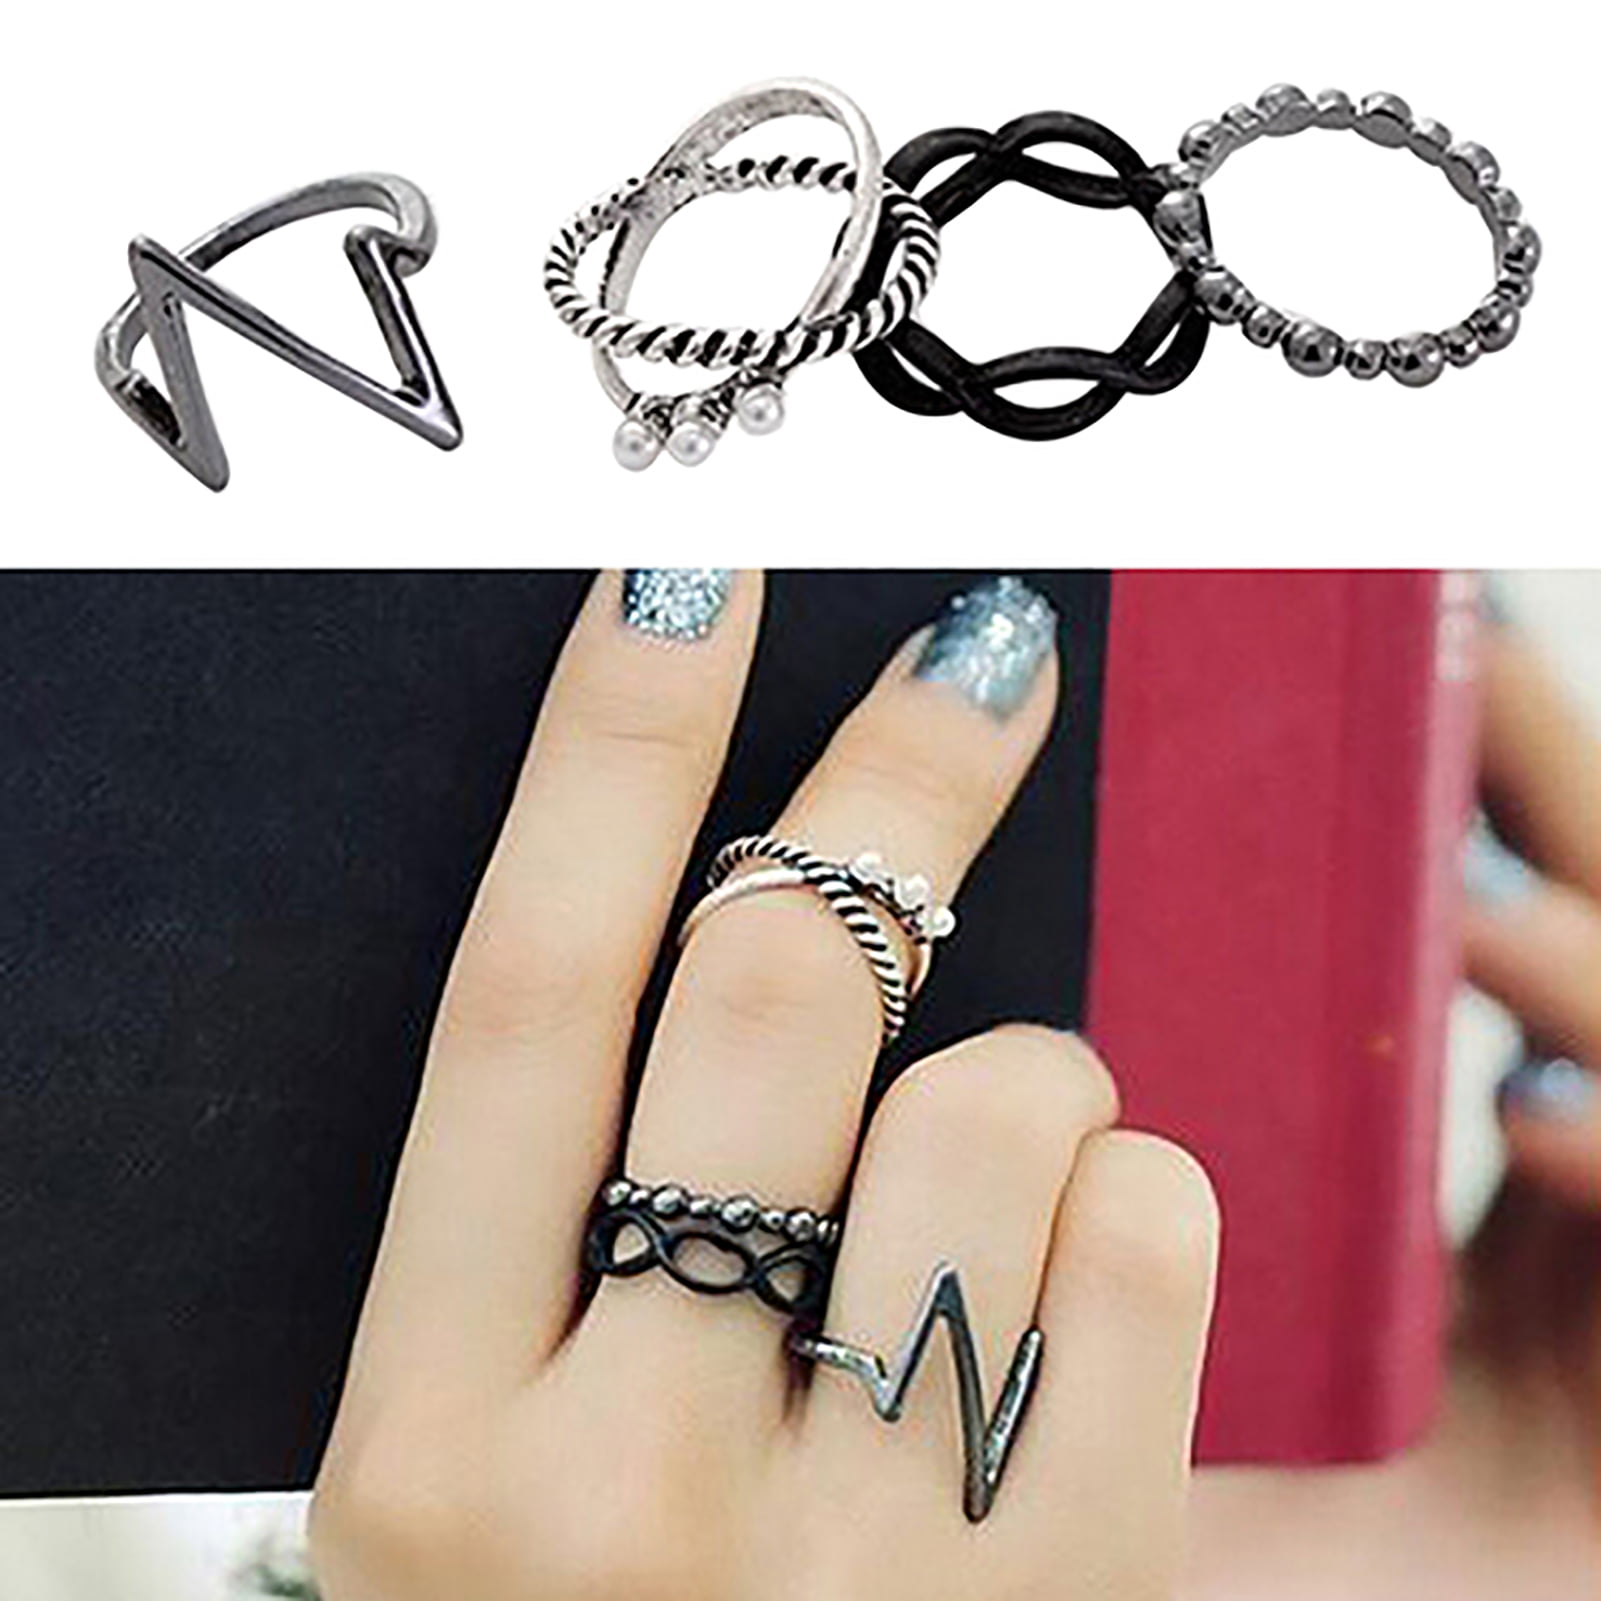 Fashion Jewelry Rings Set Hot Selling Metal Alloy Hollow Round Opening  Women Finger Ring For Girl Lady Party Wedding Gifts | Rings jewelry  fashion, Rings for girls, Round rings